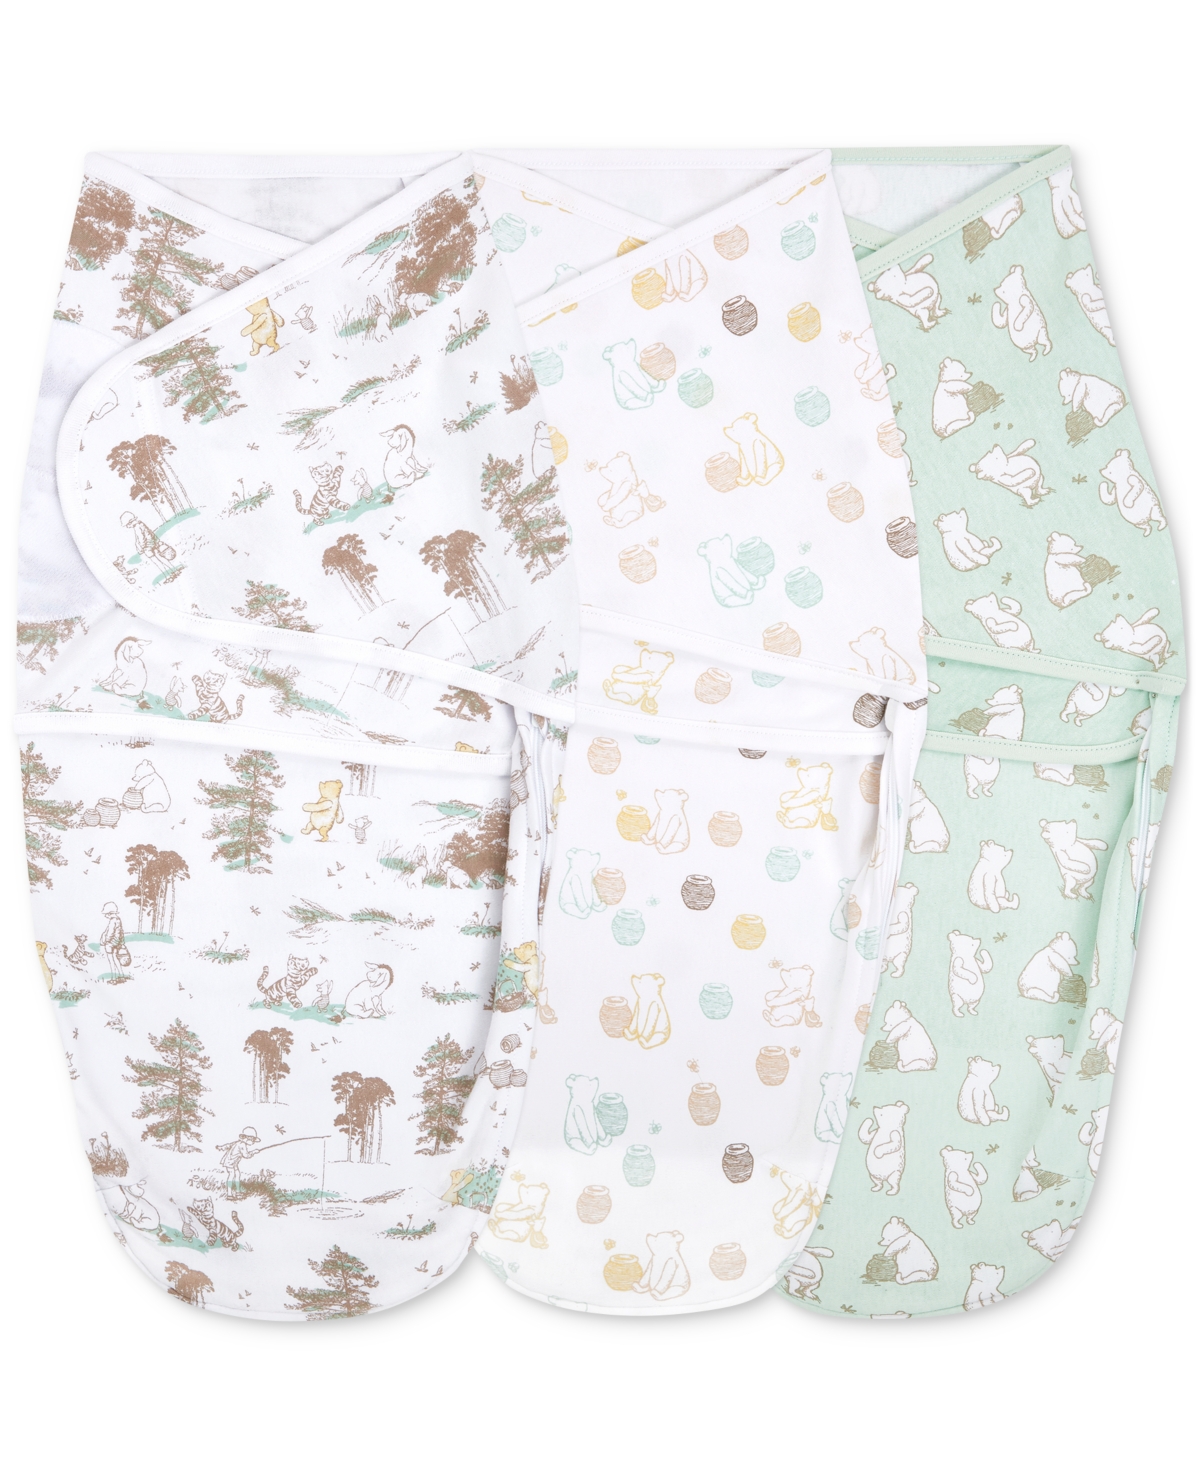 Aden By Aden + Anais Baby Boys Or Baby Girls Disney Swaddles, Pack Of 3 In Winnie The Pooh